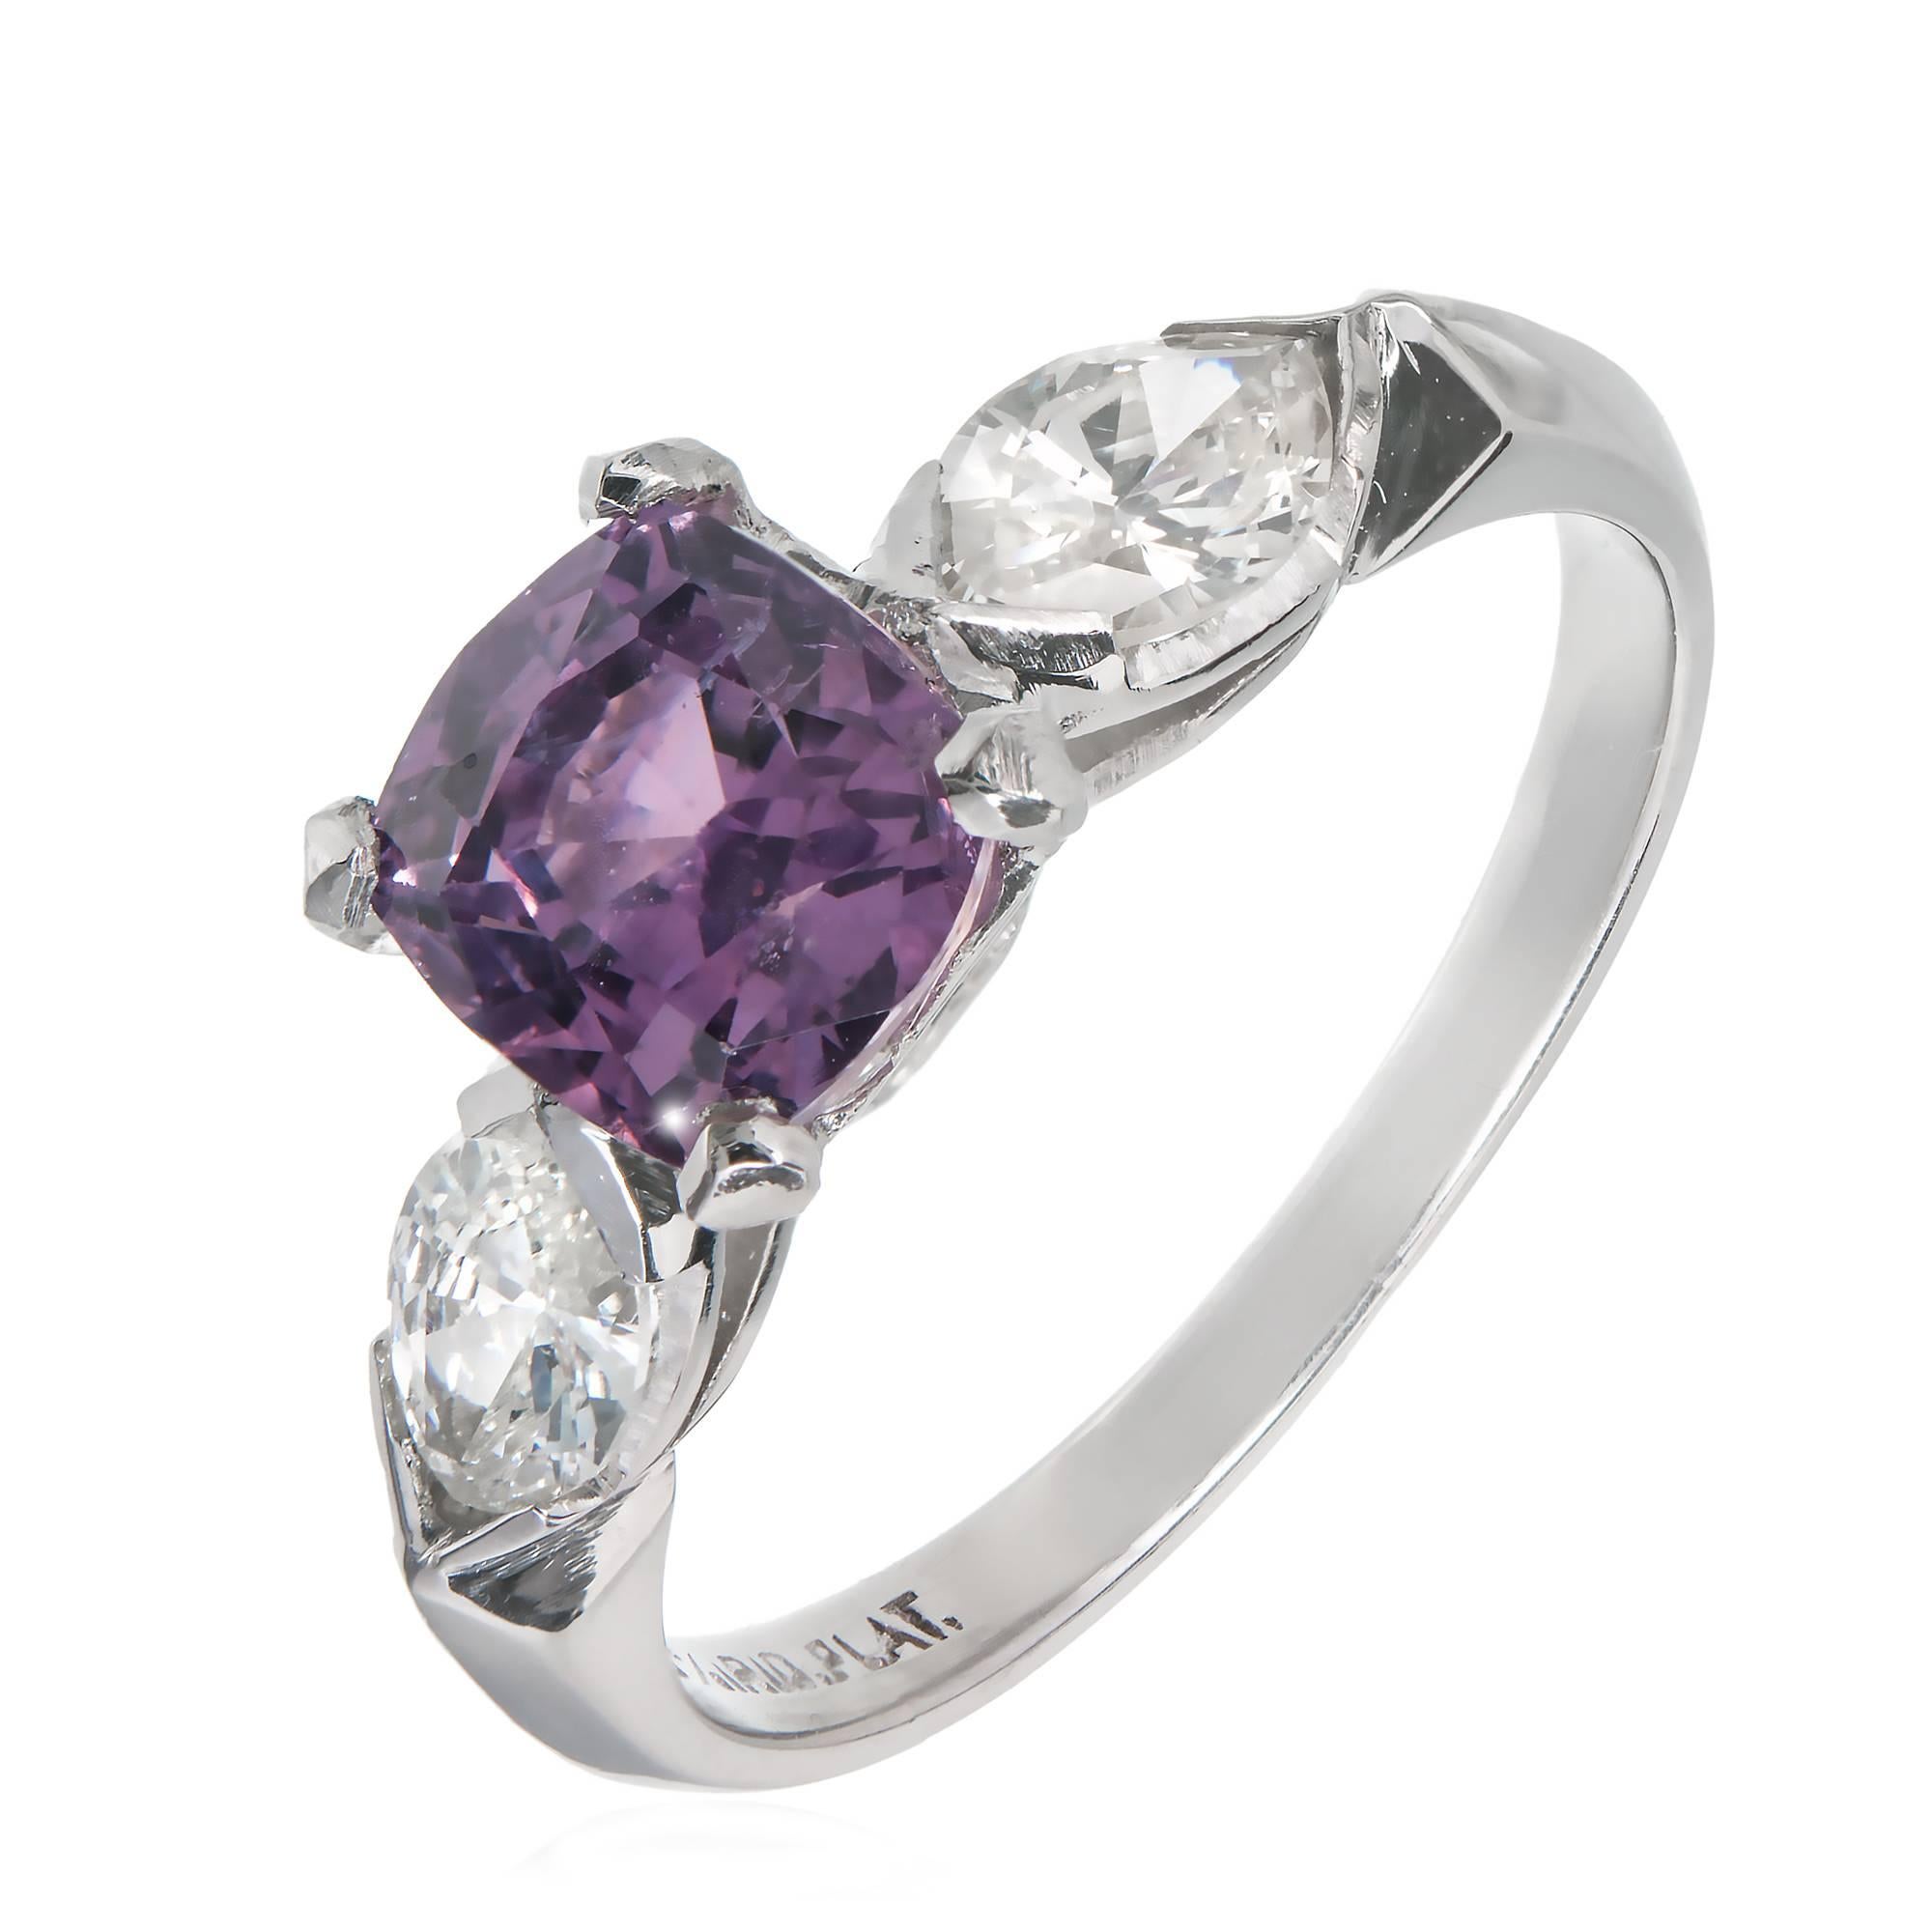 Cushion cut GIA certified purple sapphire engagement ring, with a distinct pink secondary color. 2 marquise side diamonds in a platinum setting. circa 1950s. 

1 cushion purple Sapphire, approx. total weight 1.89cts, natural no heat, 6.39 x 6.02 x